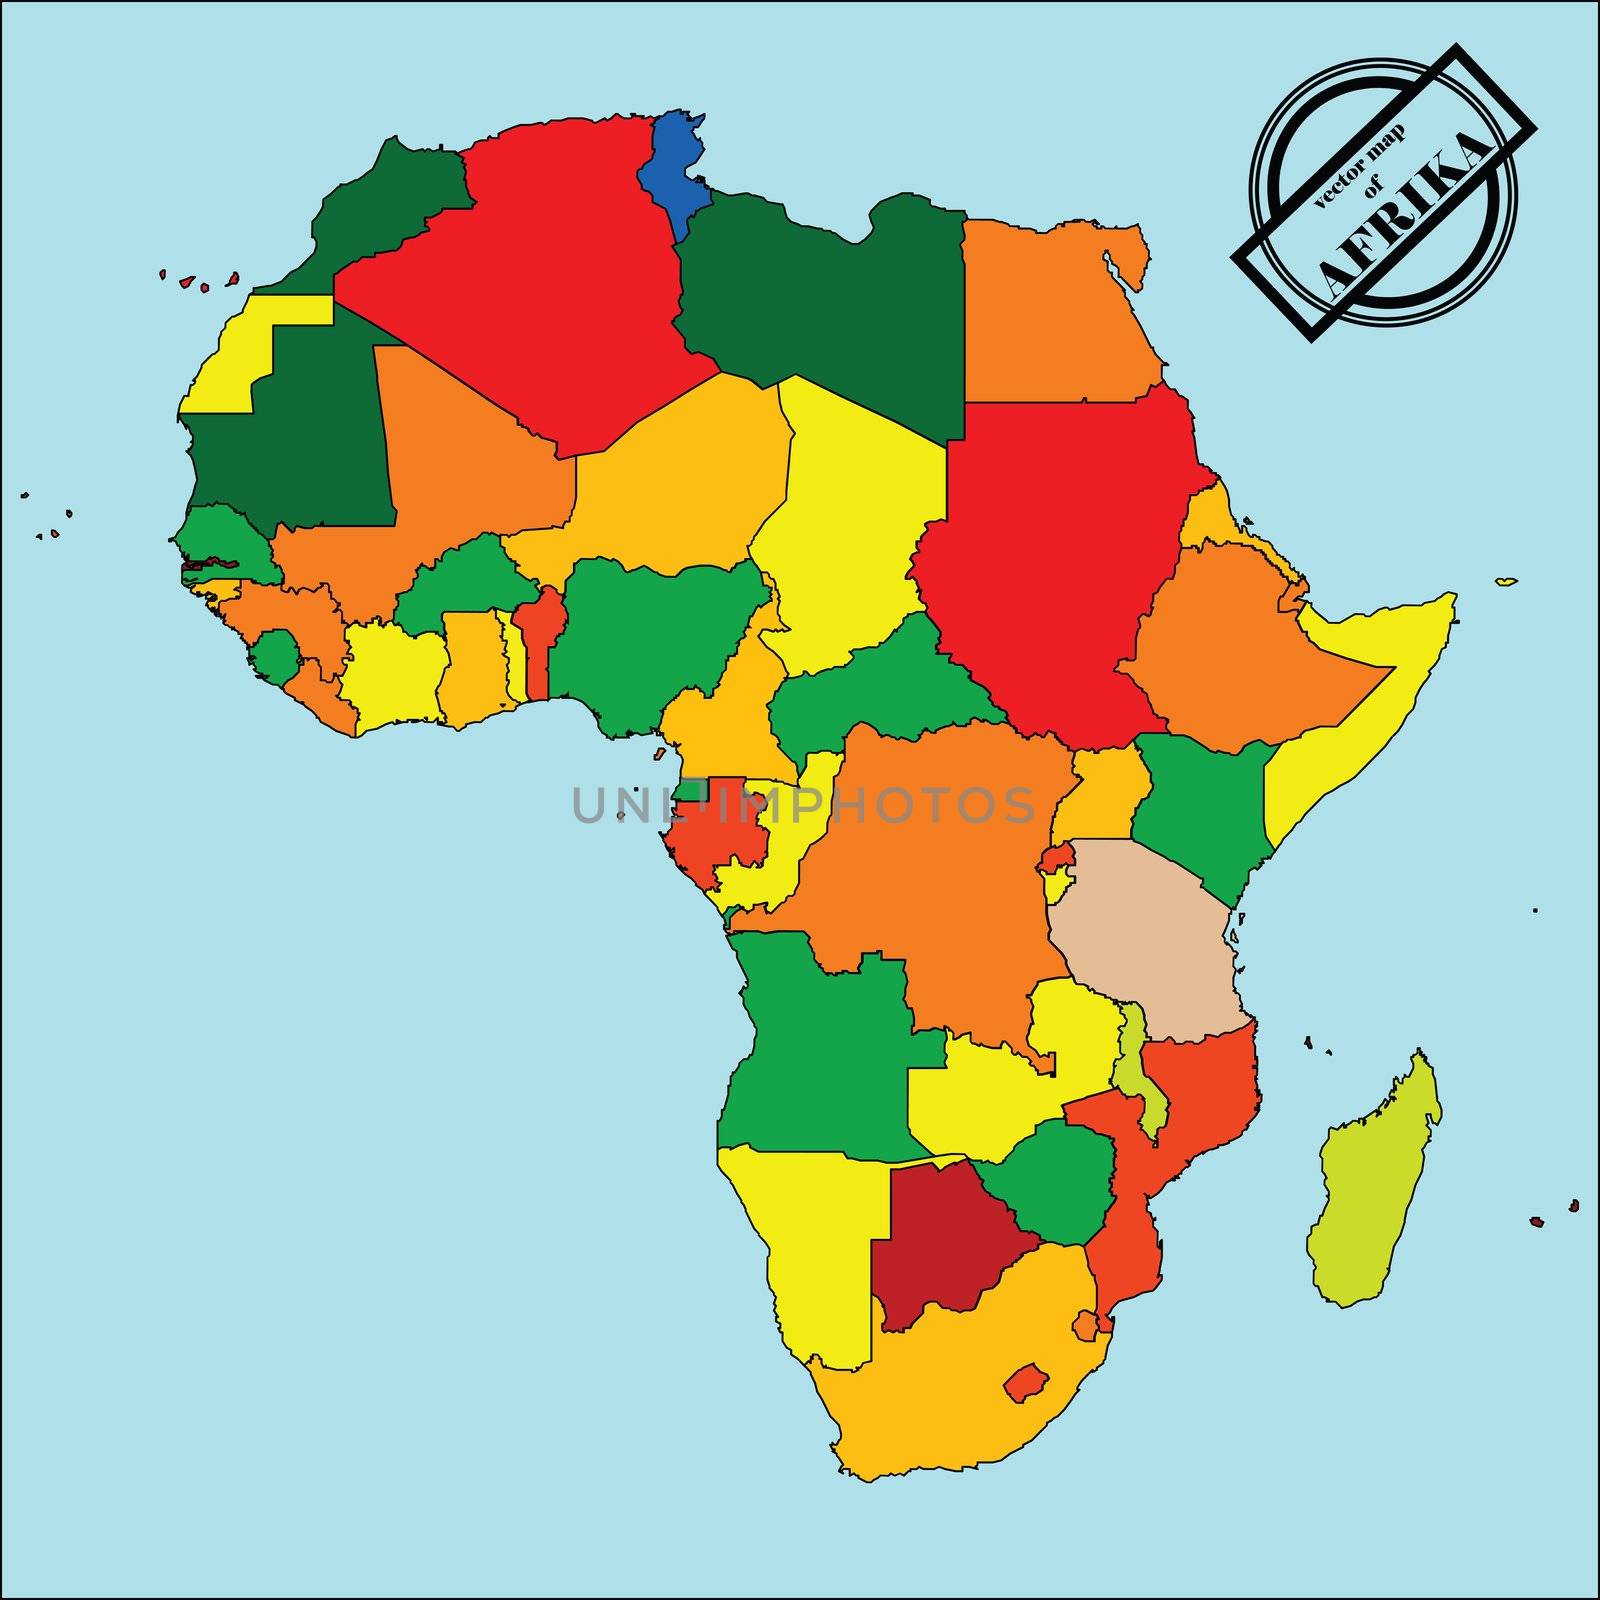 Political map of africain colors, easy to edit, copy, paste, move countries